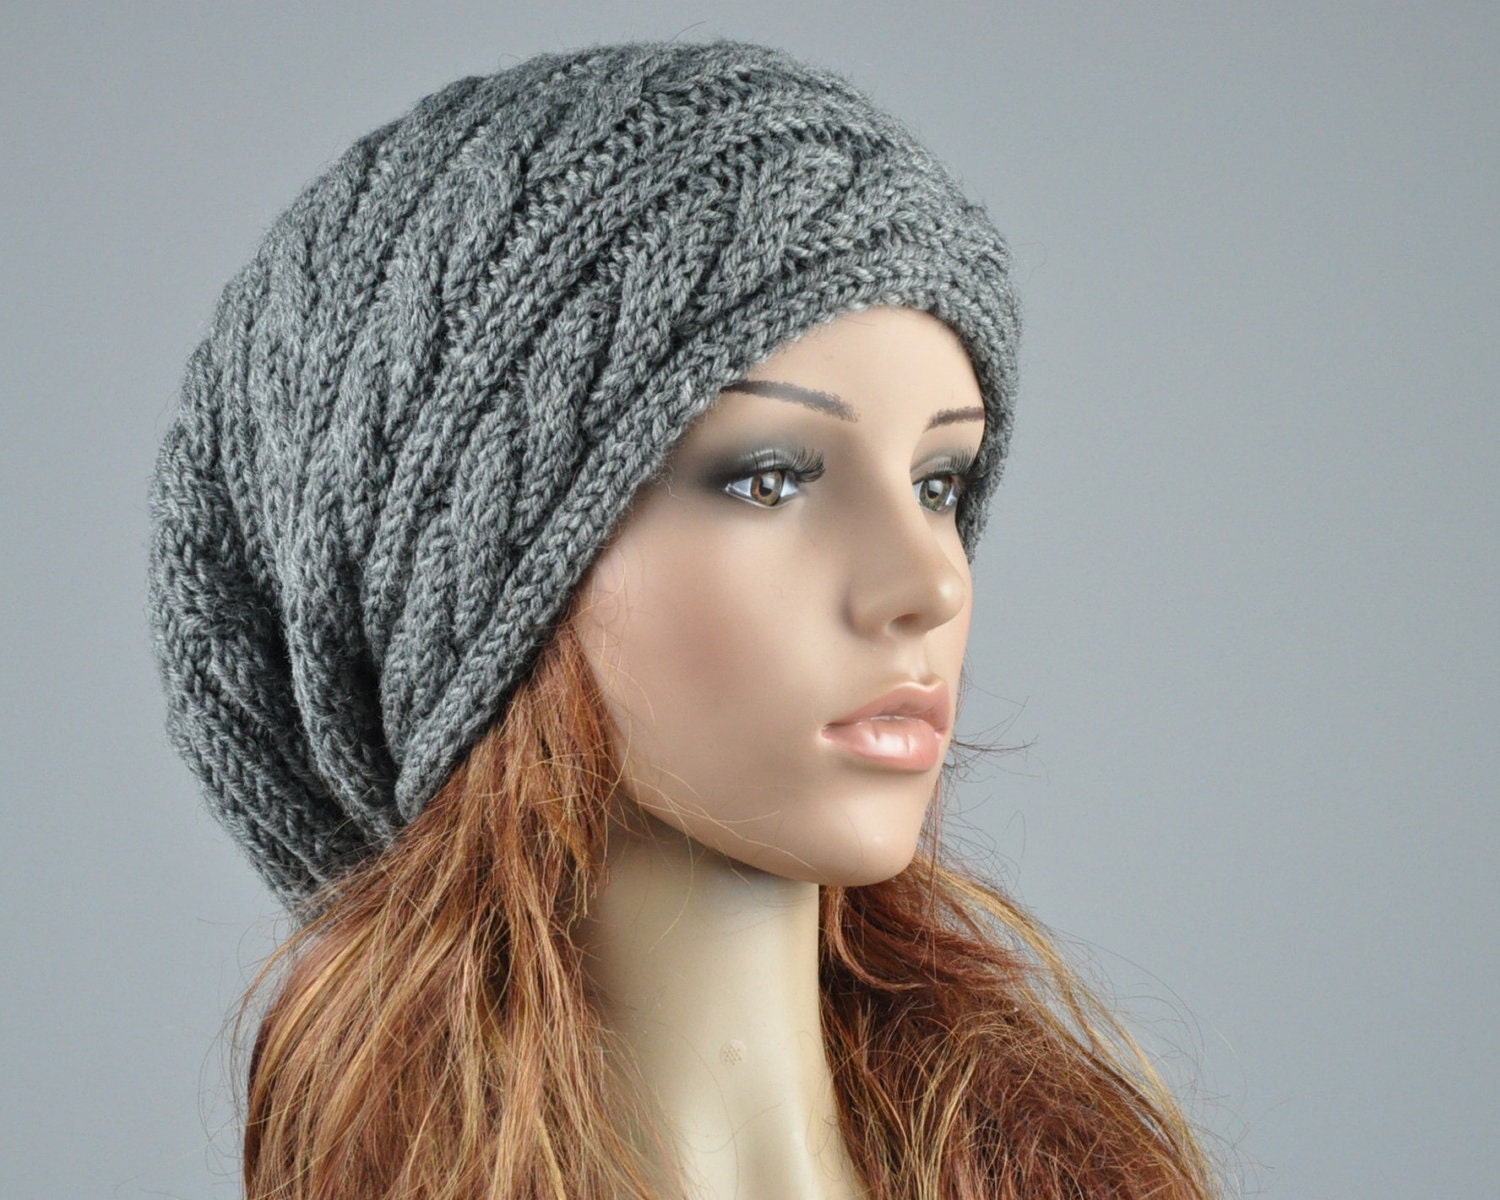 Spiral Rib Hat Knitted Hat Pattern? - Yahoo! Answers